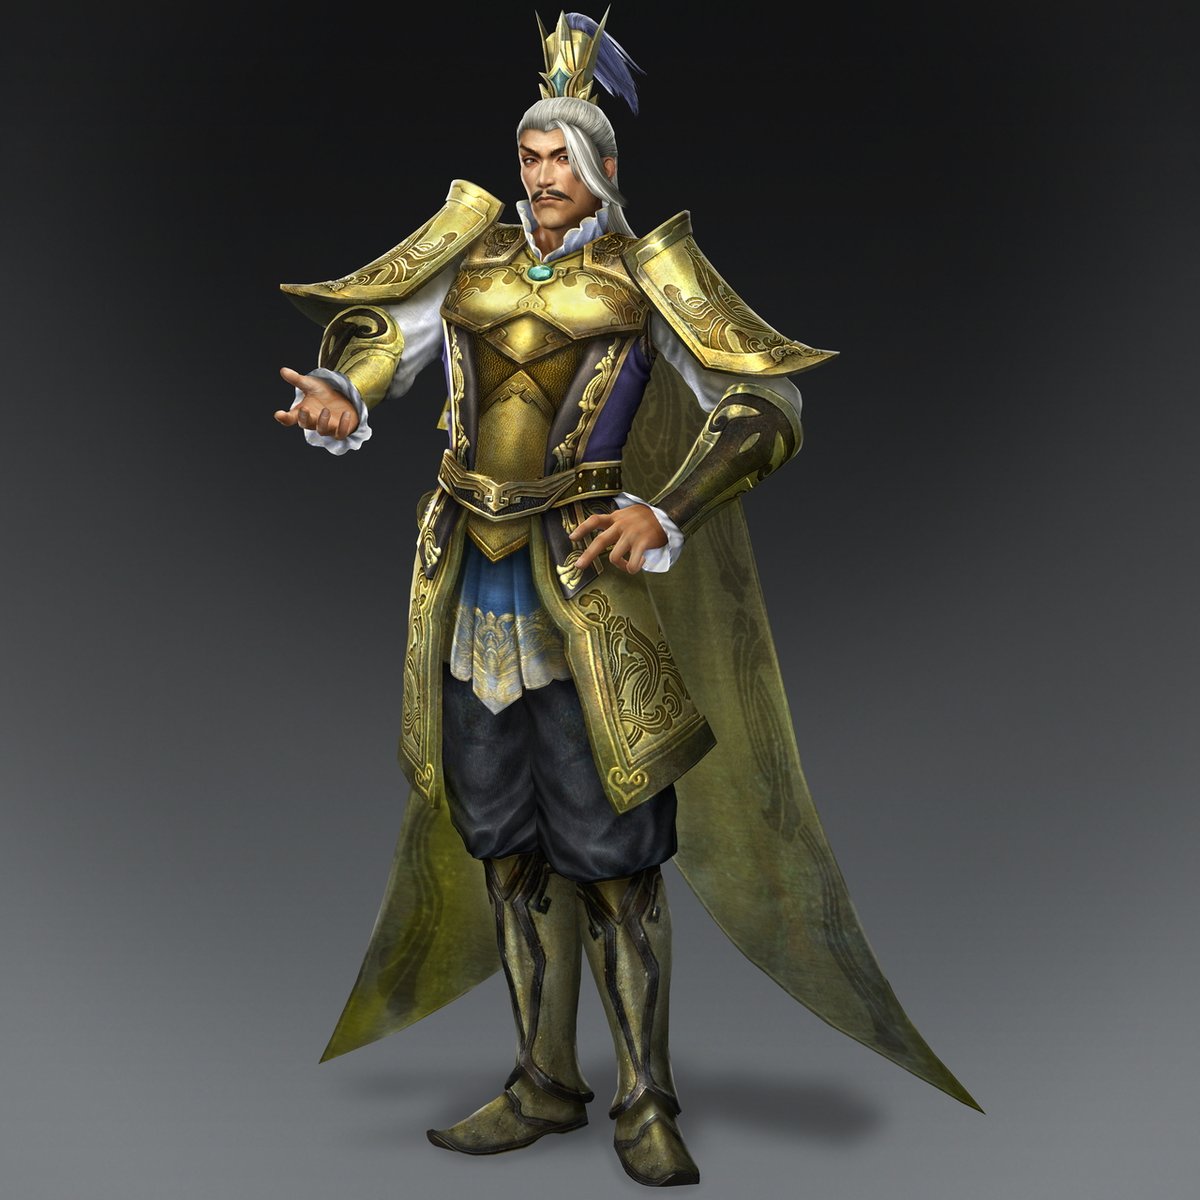 Yuan Shaowe don't talk about his pre-DW6 design ANYWAY he's super prideful and pretentious and always banging on about how noble he is, which is a lot funnier than it sounds I swear. Literally one of the funniest characters in the series. Loves himself more than anything else.